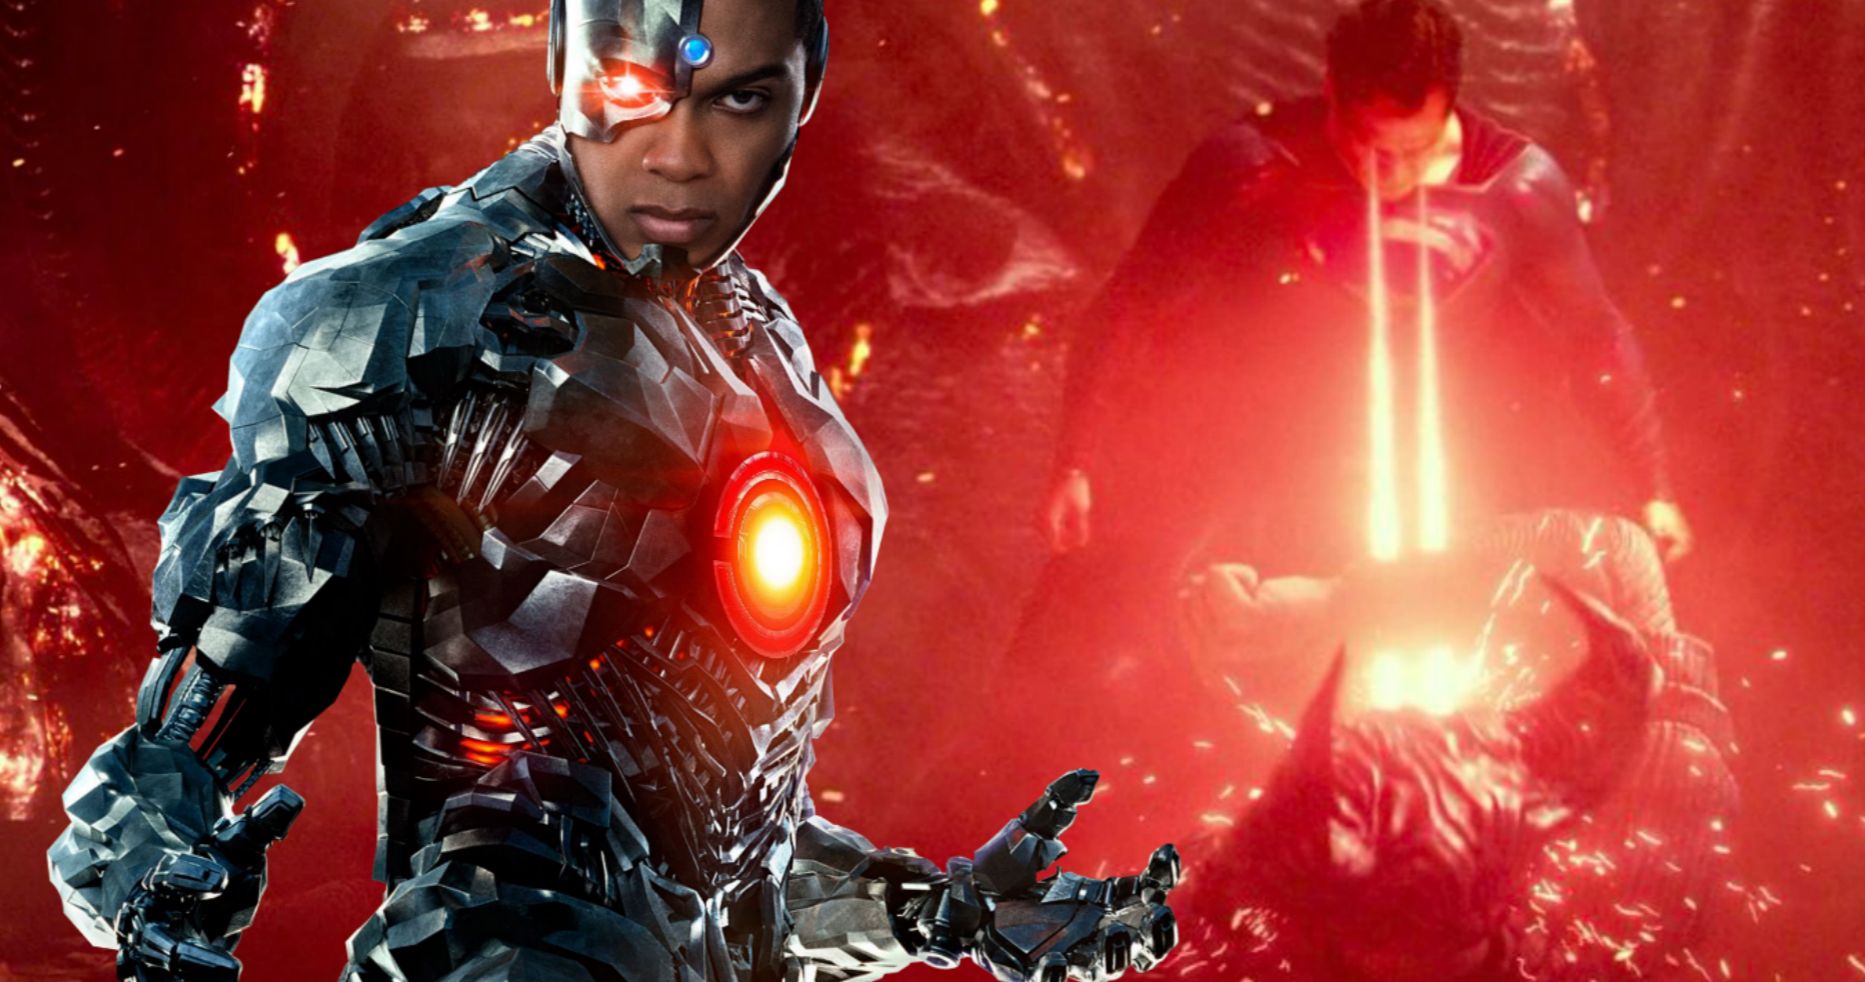 New Cyborg Photo &amp; Superman Art Continue #ReleasetheSnyderCut Cry for Justice League